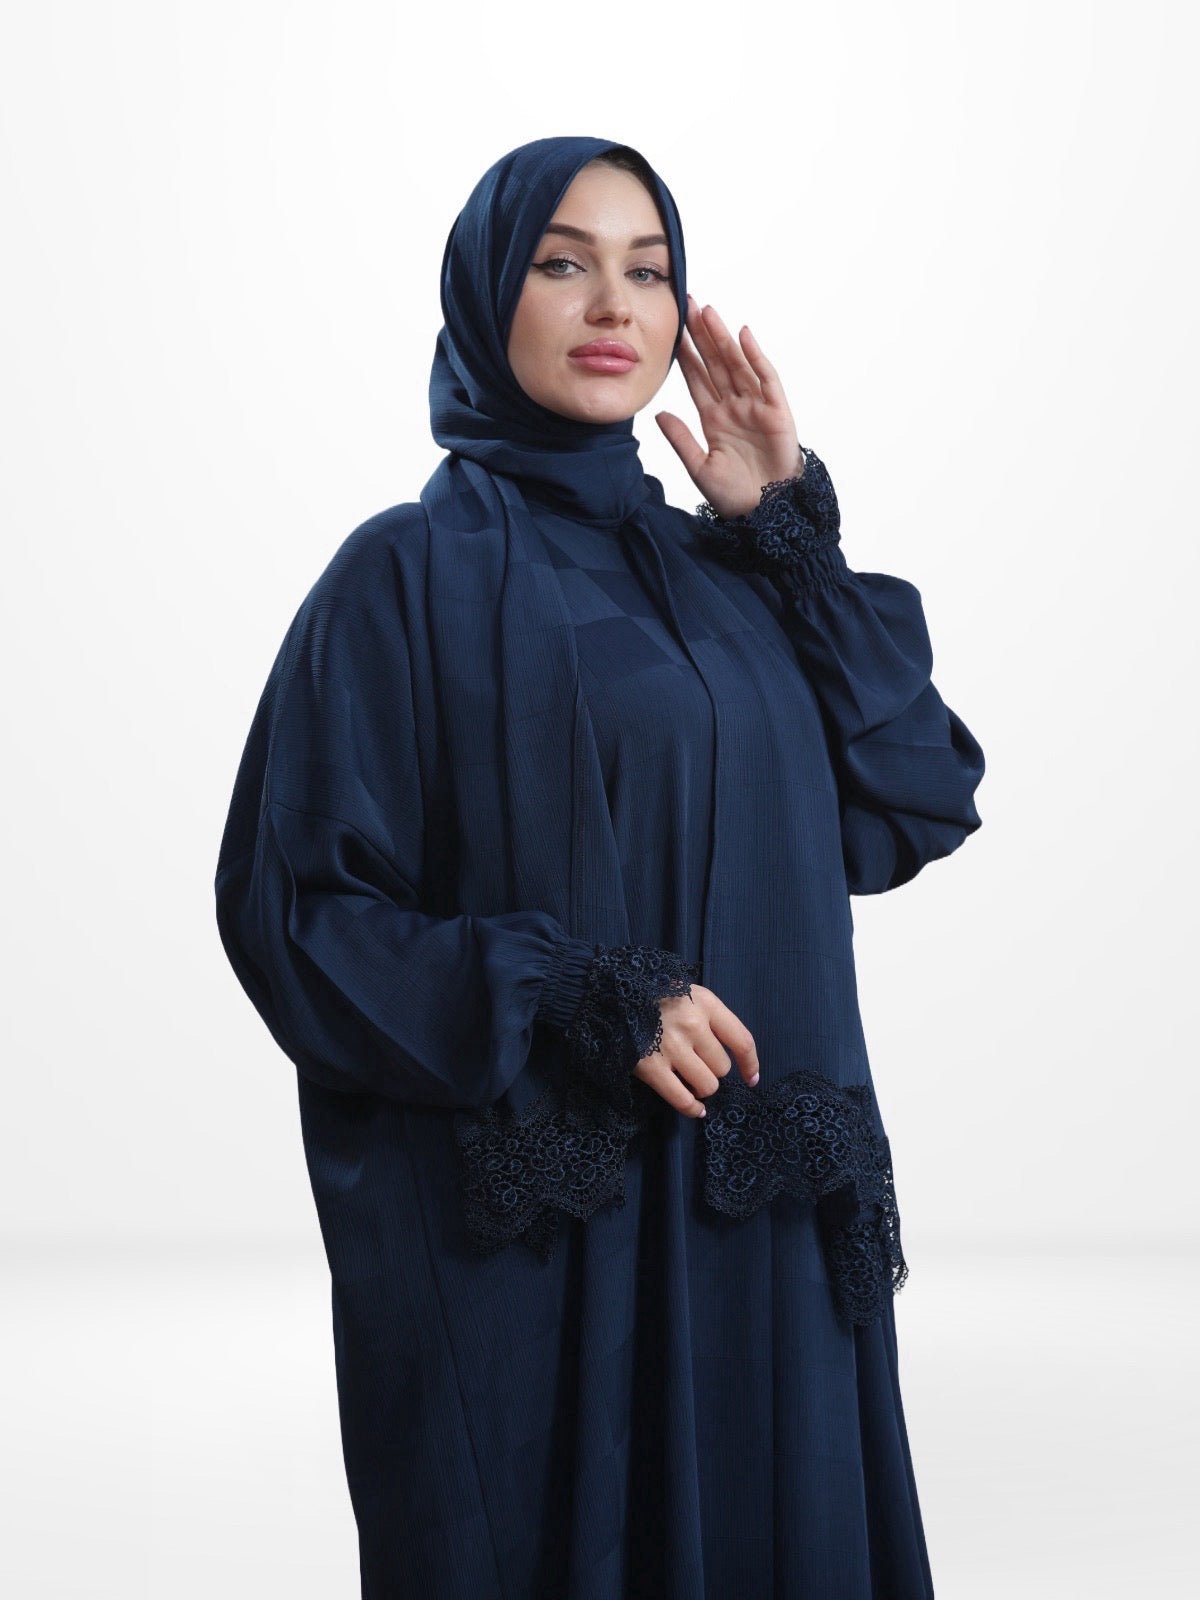 One - Piece Prayer Dress & Abaya with attached Hijab - Plaid Patterned Crepe - Modest Essence